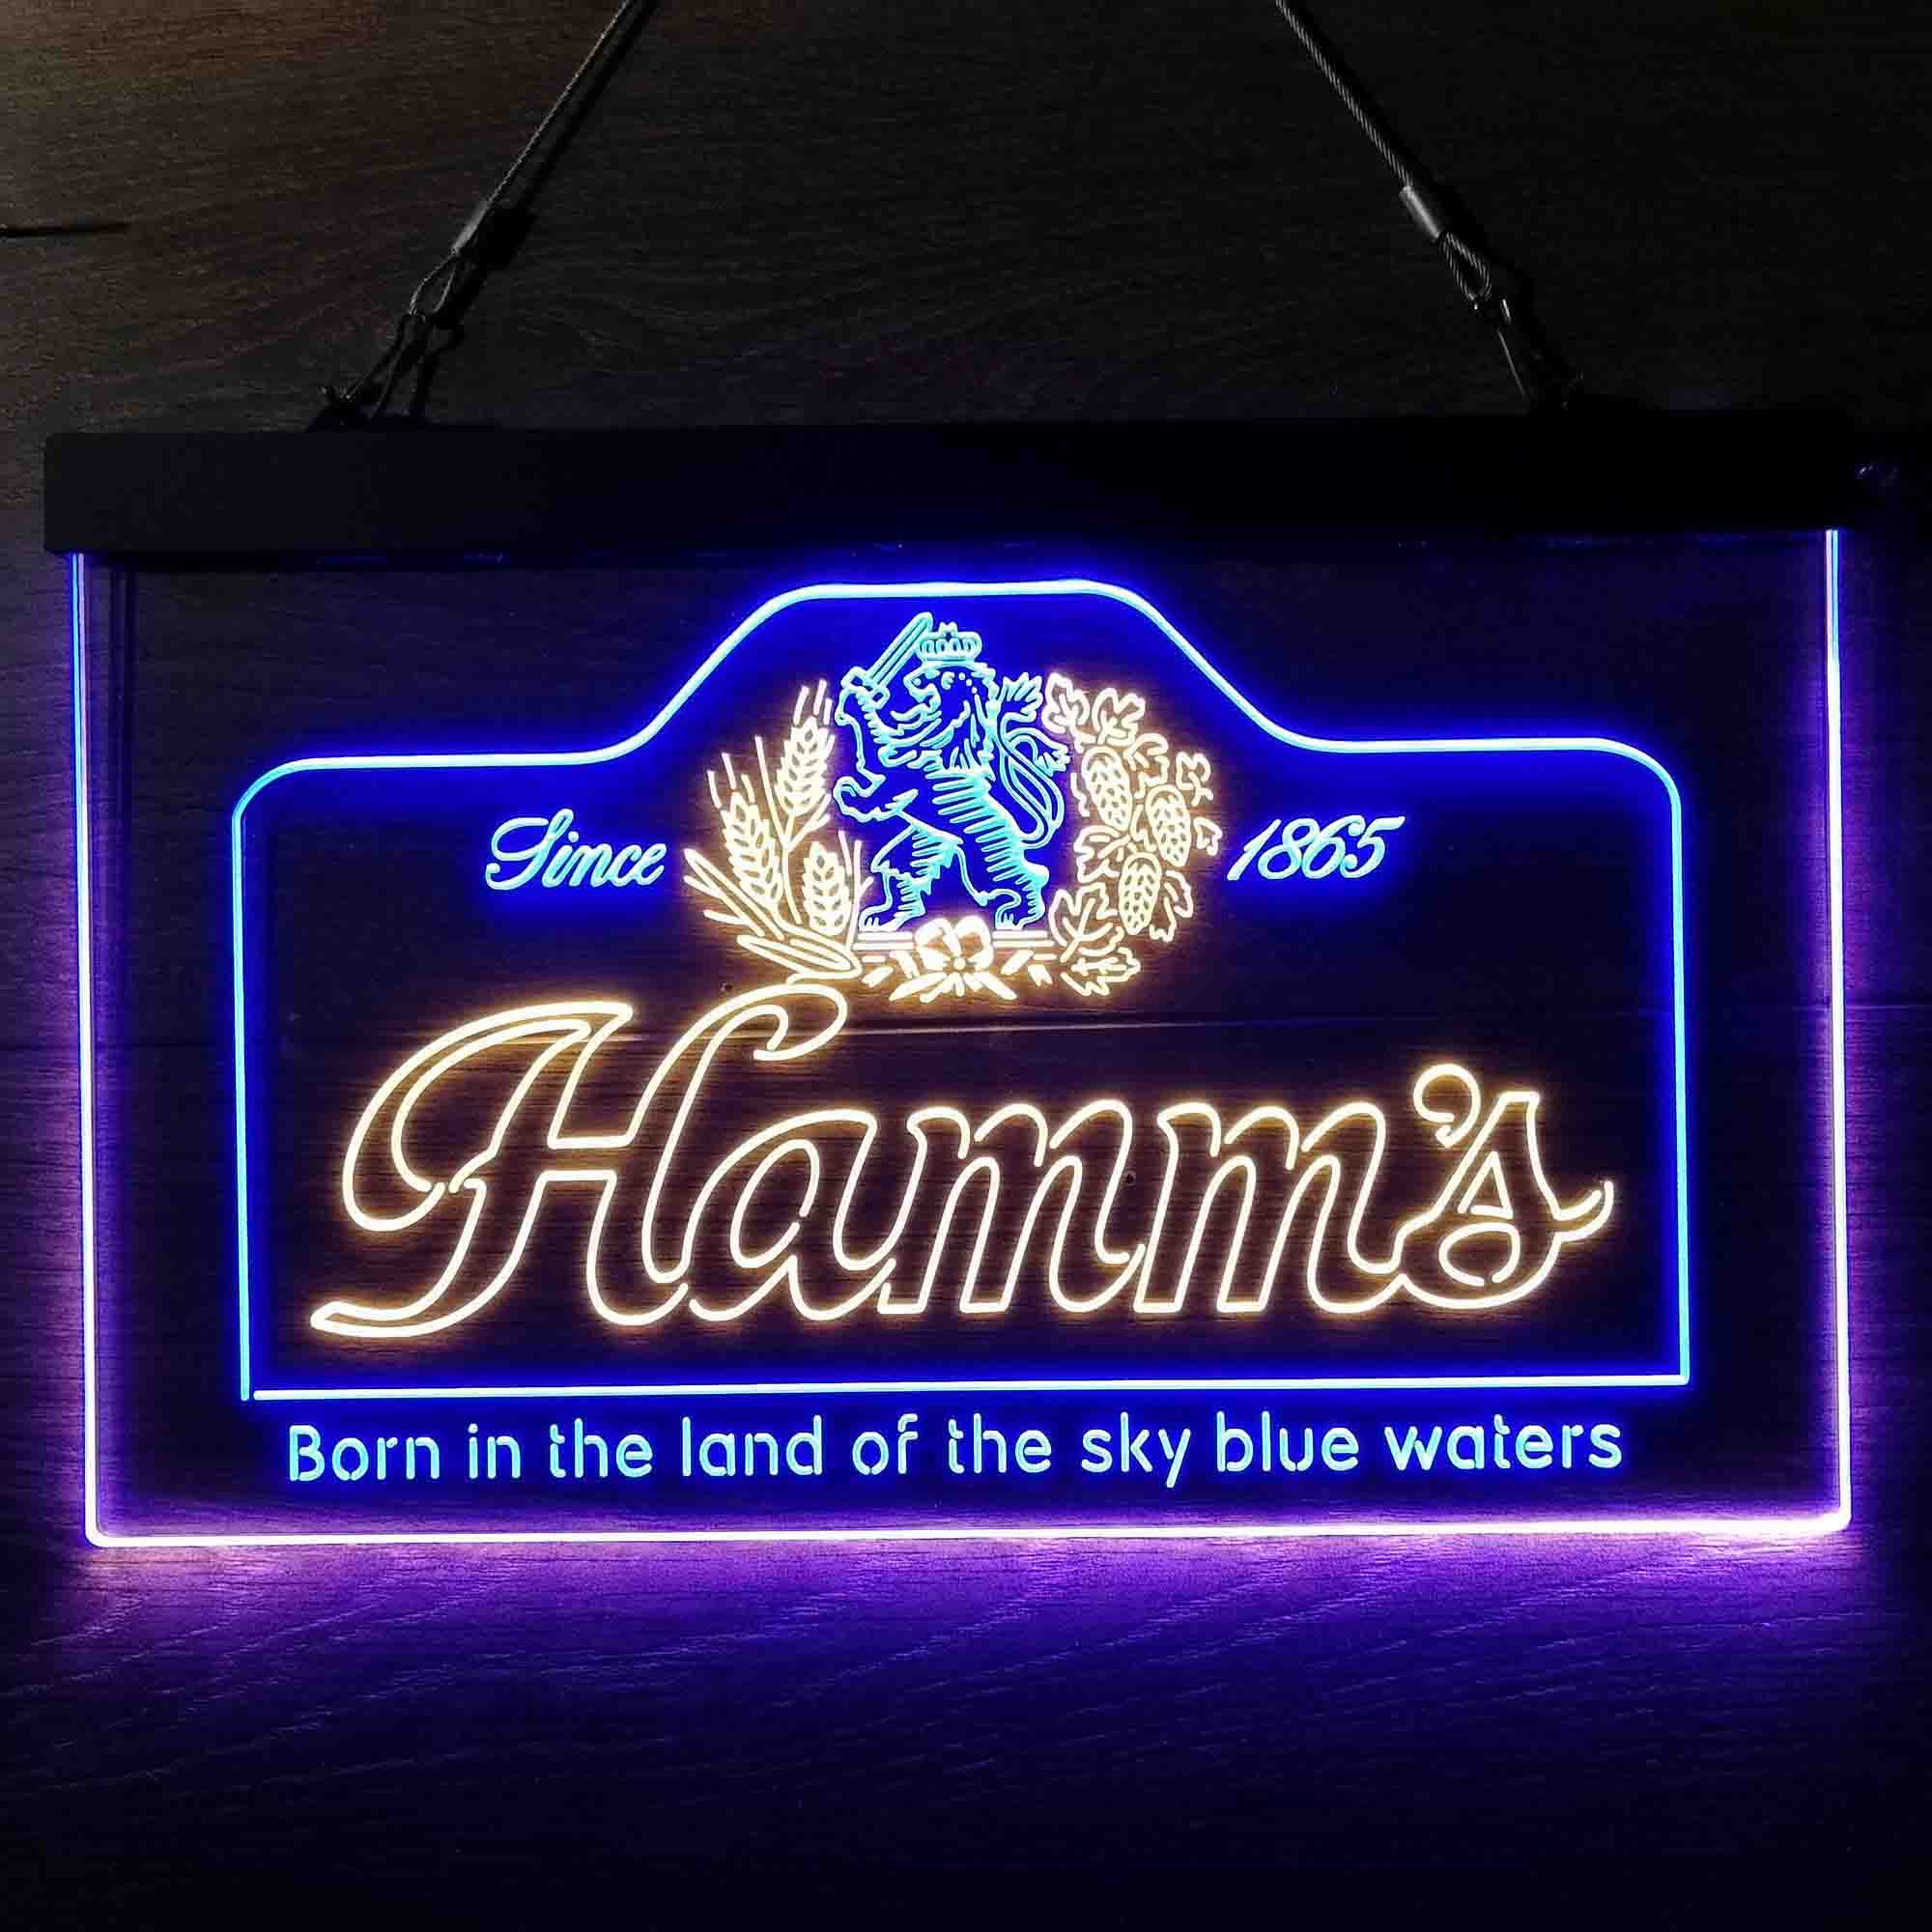 Hamm's 1865 Born in the land of sky blue waters Neon LED Sign